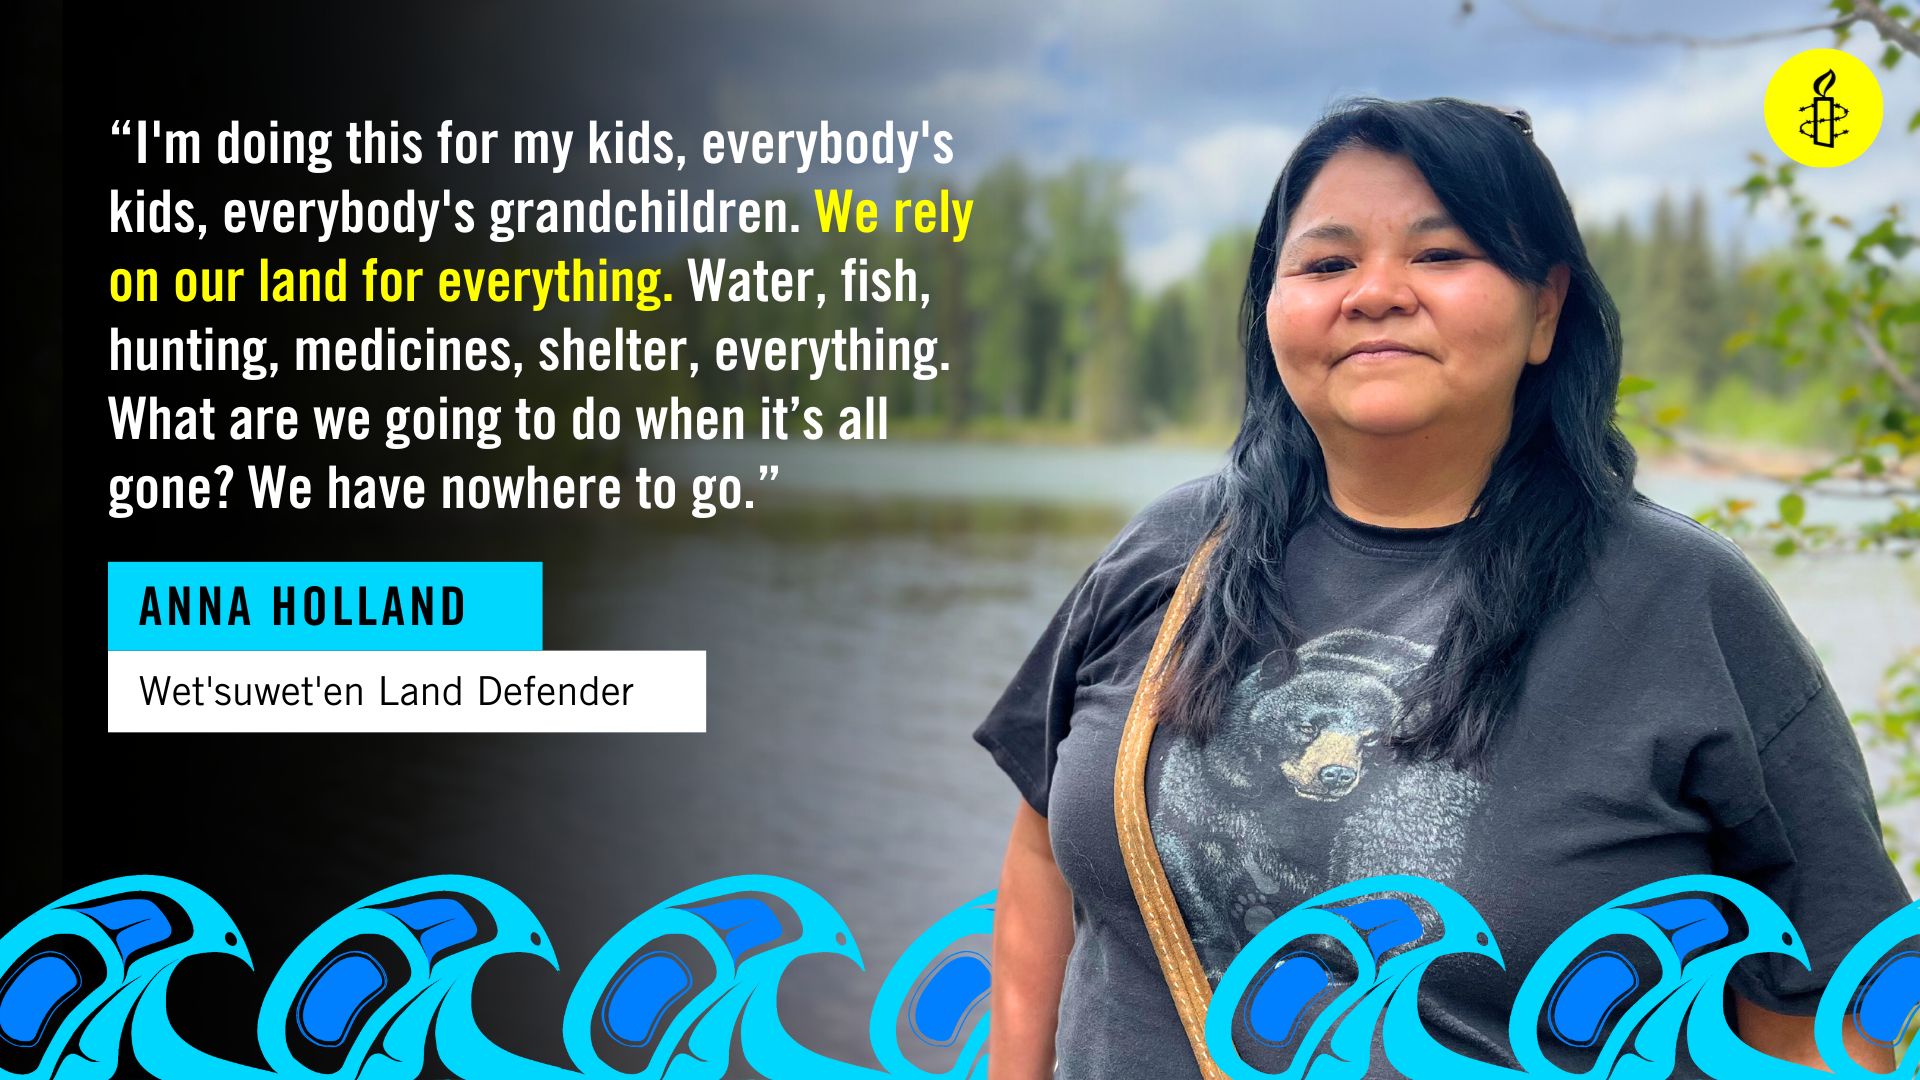 Anna Holland, Wet'suwet'en Land Defender quote: "I'm doing this for my kids, everybody's kids, everybody's grandchildren. We rely on our land for everything. Water, fish, hunting, medicines, shelter, everything. What are we going to do when it's all gone? We have nowhere to go."